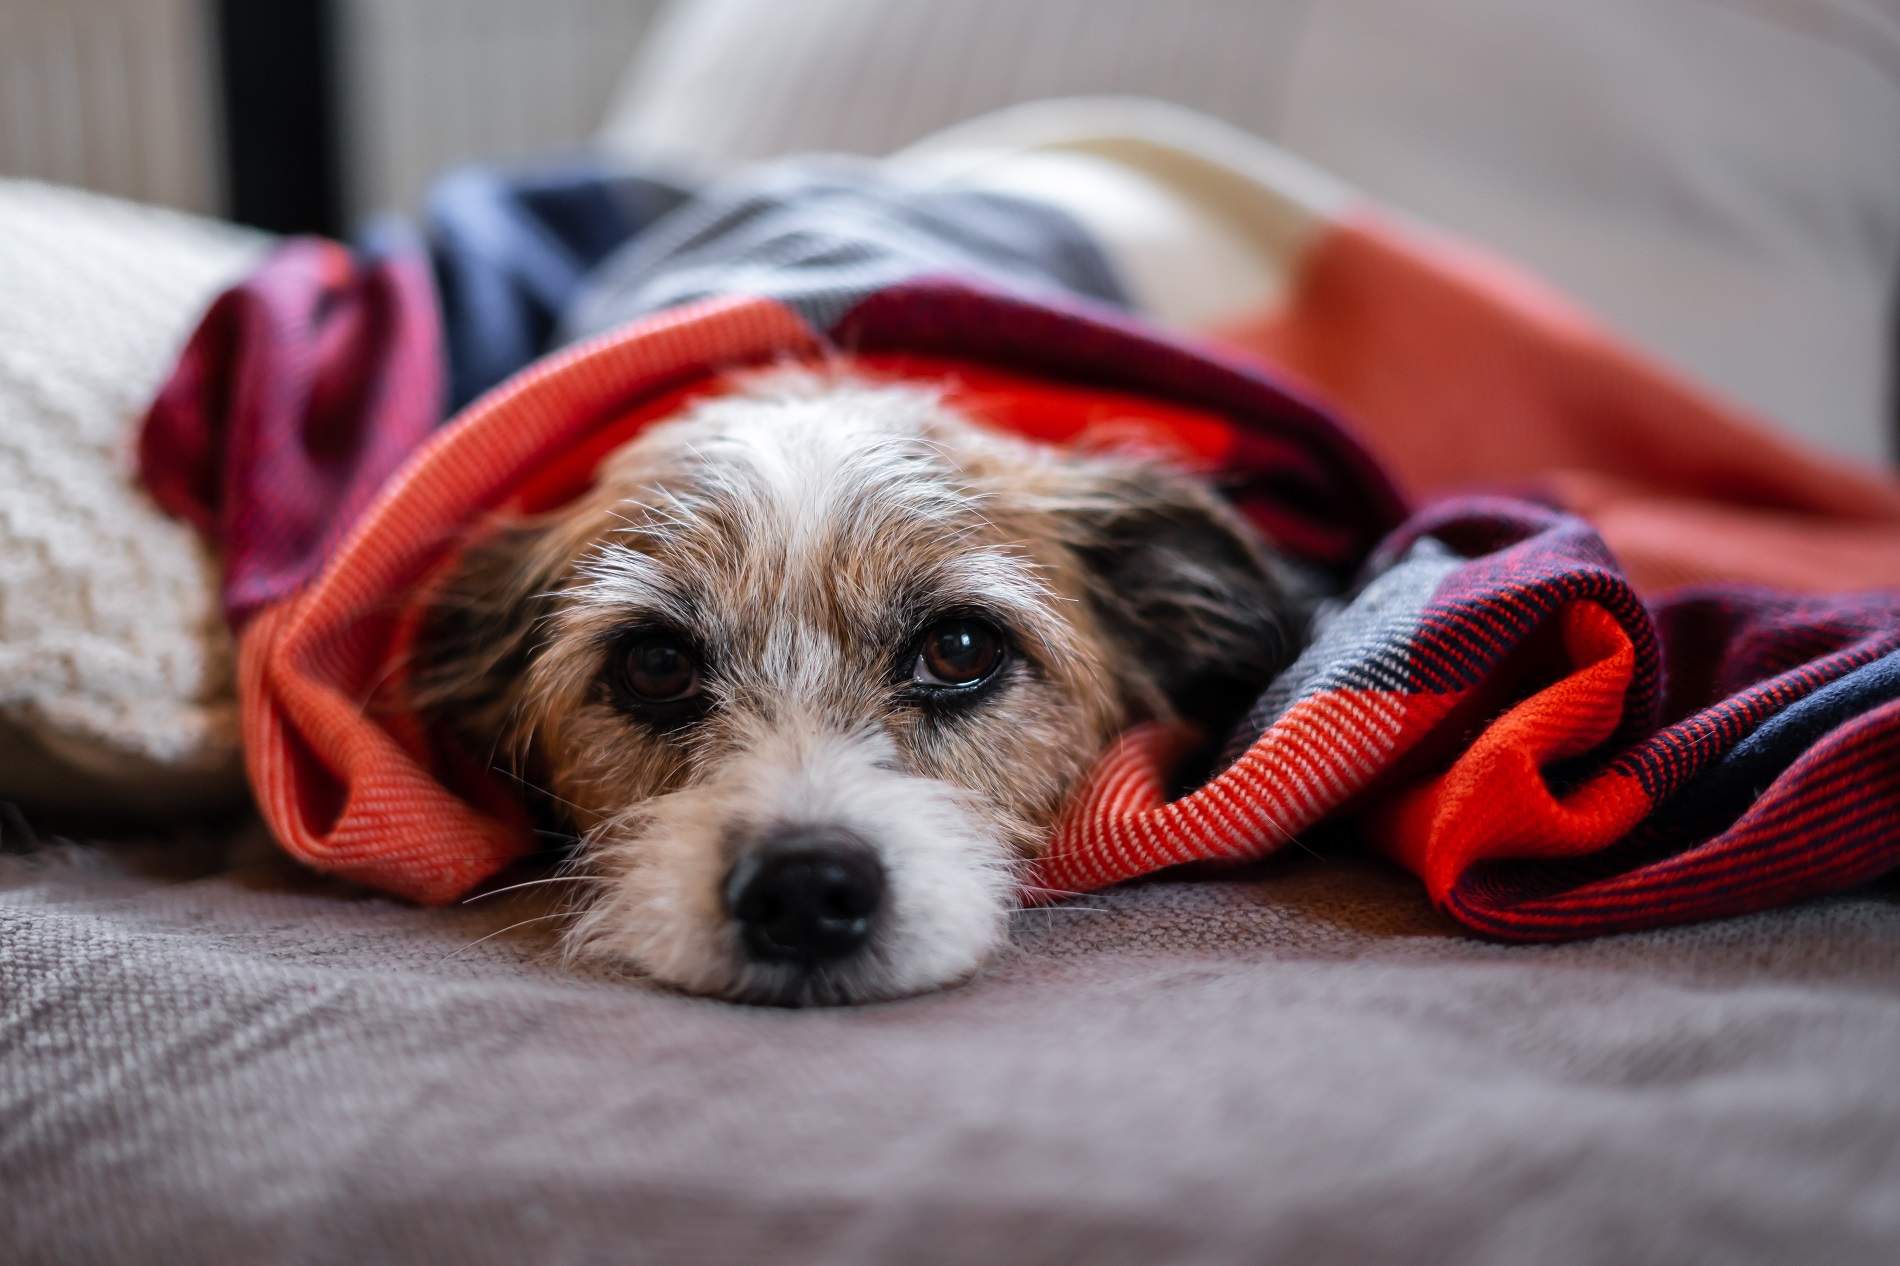 Sick Jack Russel dog lies wrapped in a brightly colored blanket on a couch